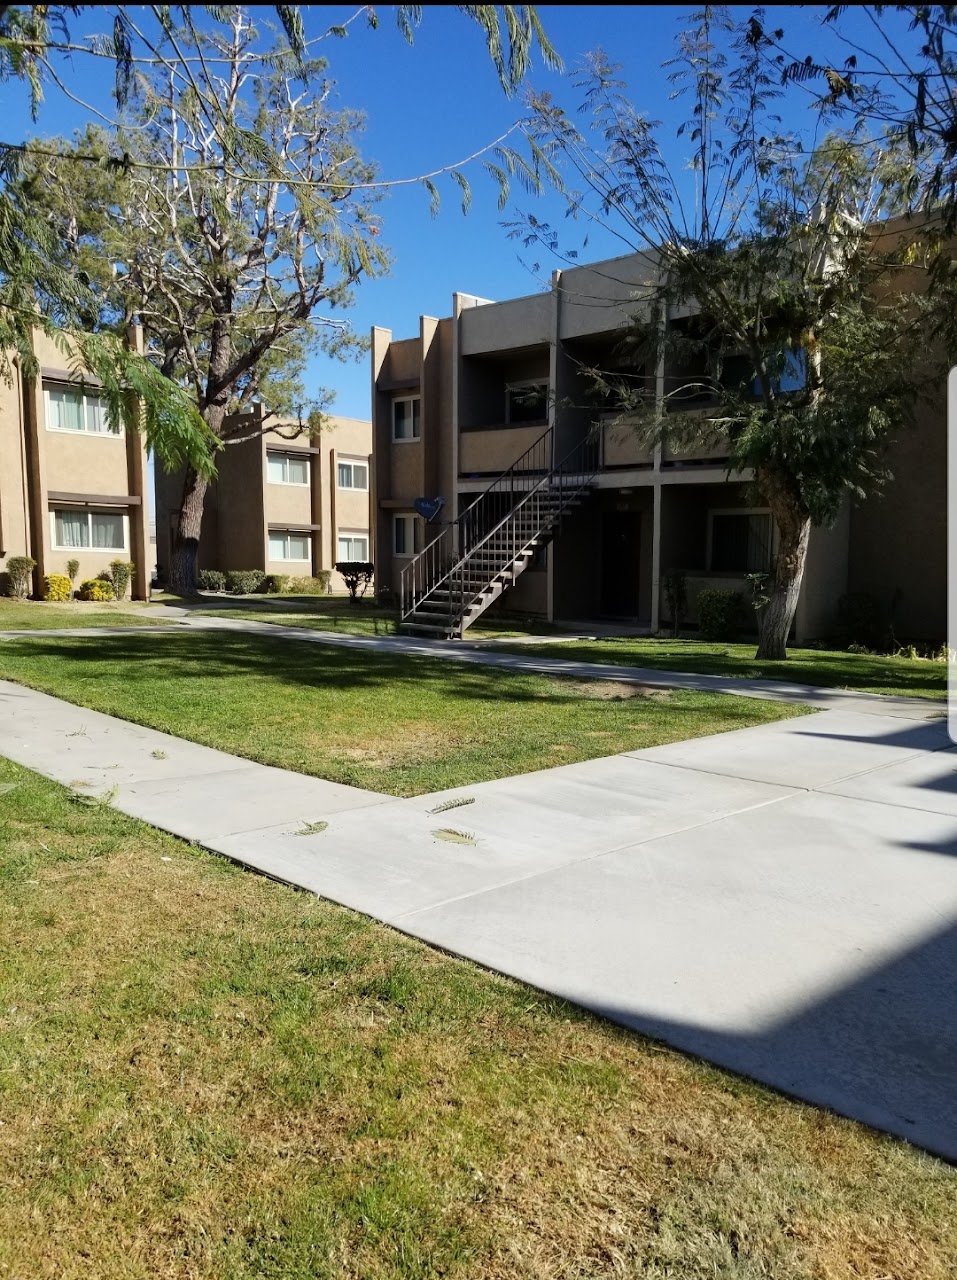 Photo of RODEO DRIVE. Affordable housing located at 14200 RODEO DR VICTORVILLE, CA 92395